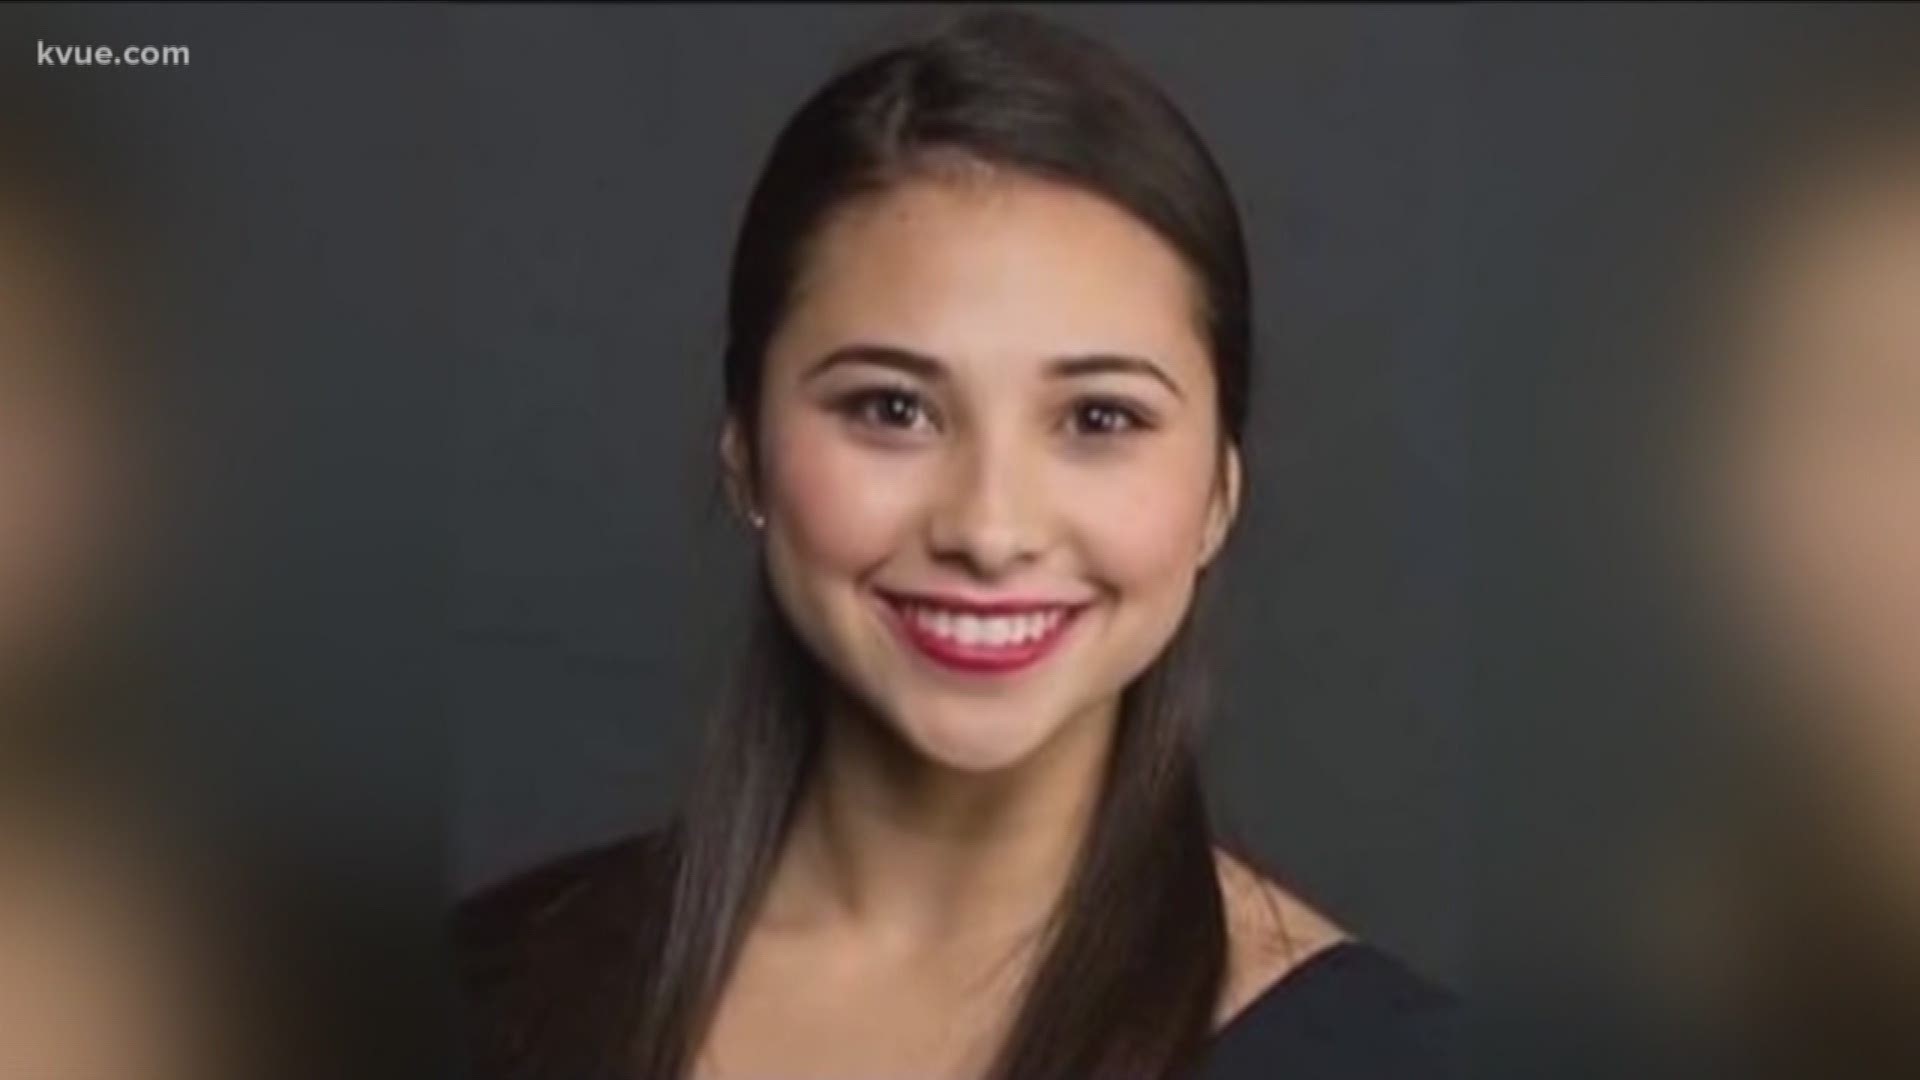 Haruka Weiser died on April 3, 2016, after being attacked while walking through campus. In 2018, her killer, Meechaeil Crinder, was sentenced to life in prison.